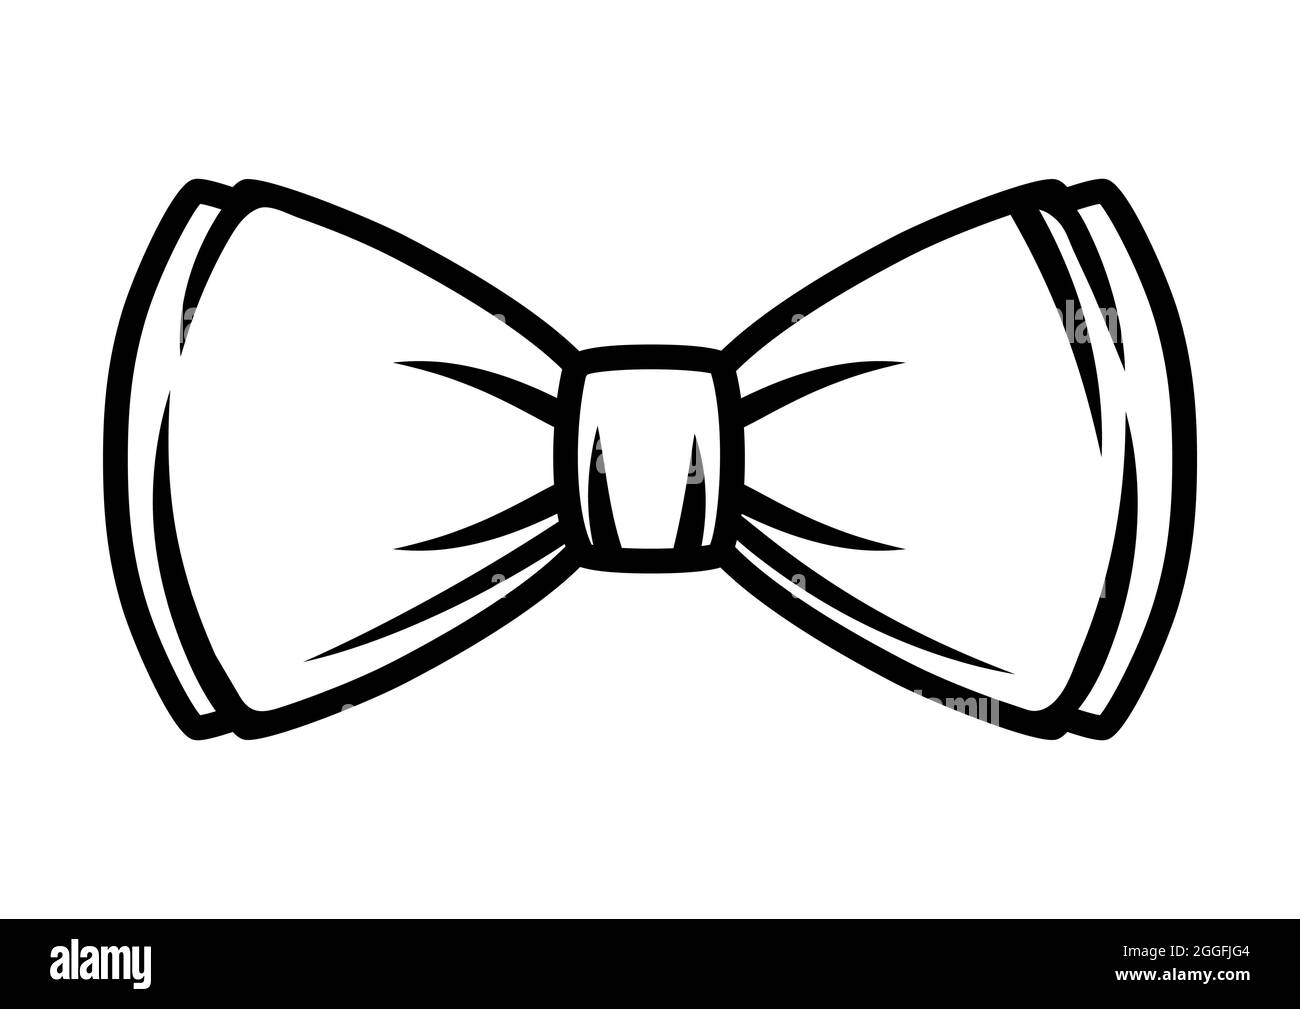 Illustration of bow tie. Black and white stylized picture. Stock Vector